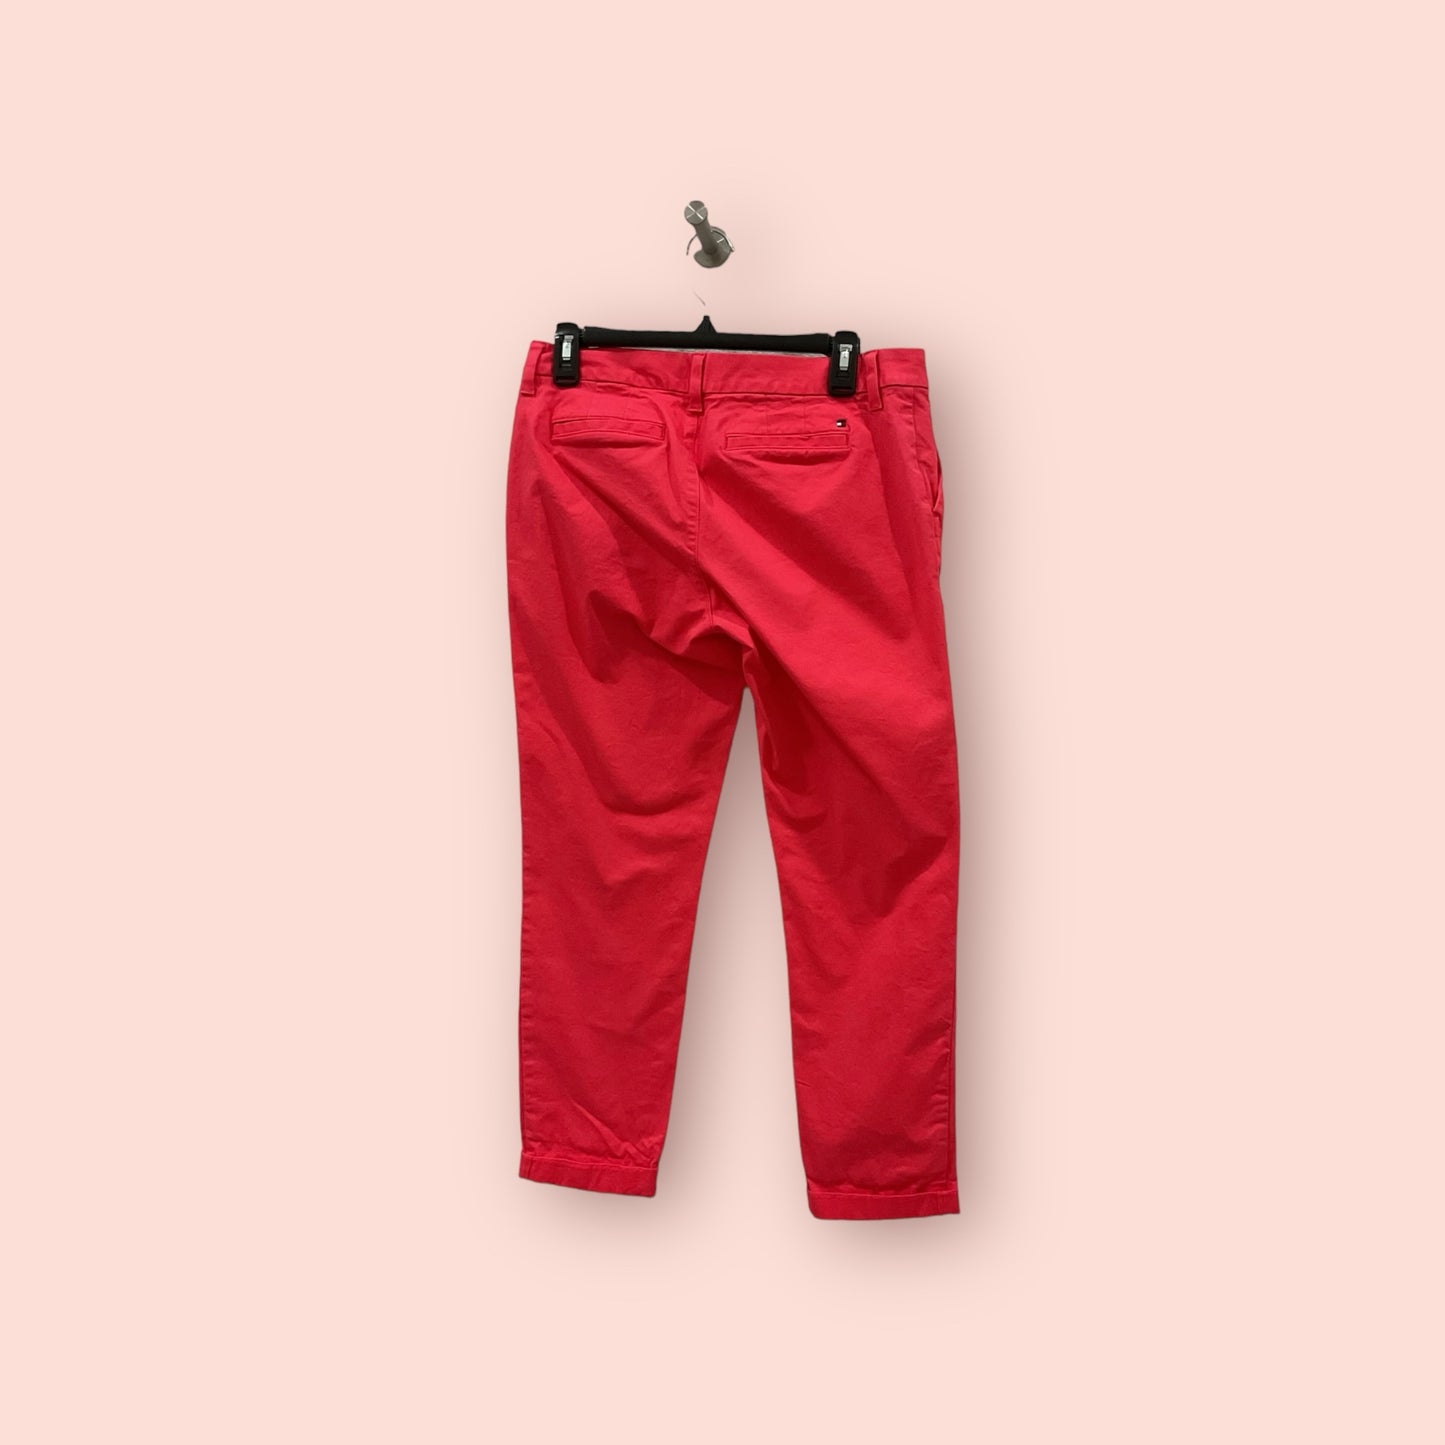 Tommy Hilfiger Size 6 Like New Coral Pants